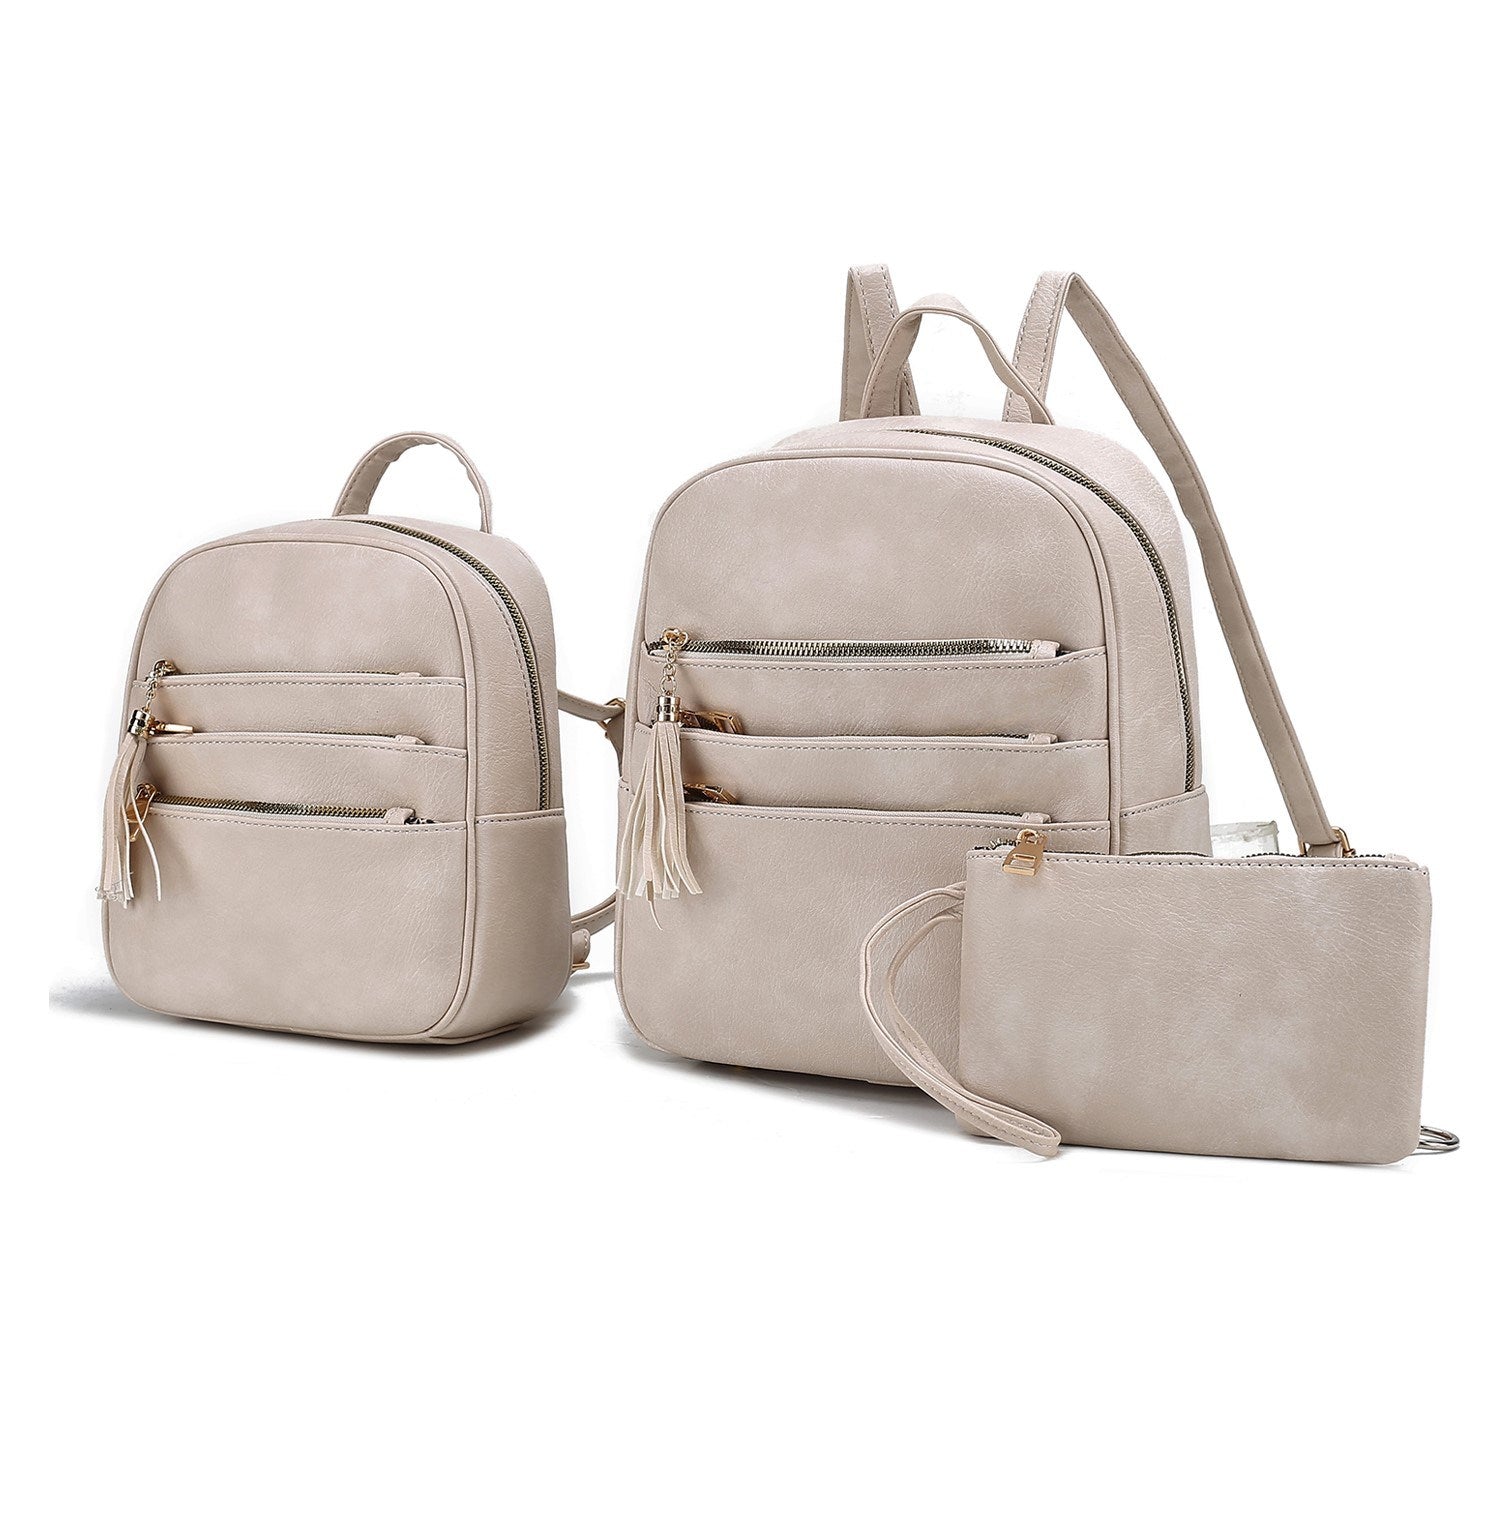 Two MKF Collection Roxane Vegan Leather Women's Backpacks with Mini Backpack and Wristlet Pouch- 3 pieces by Mia k, and a wallet.